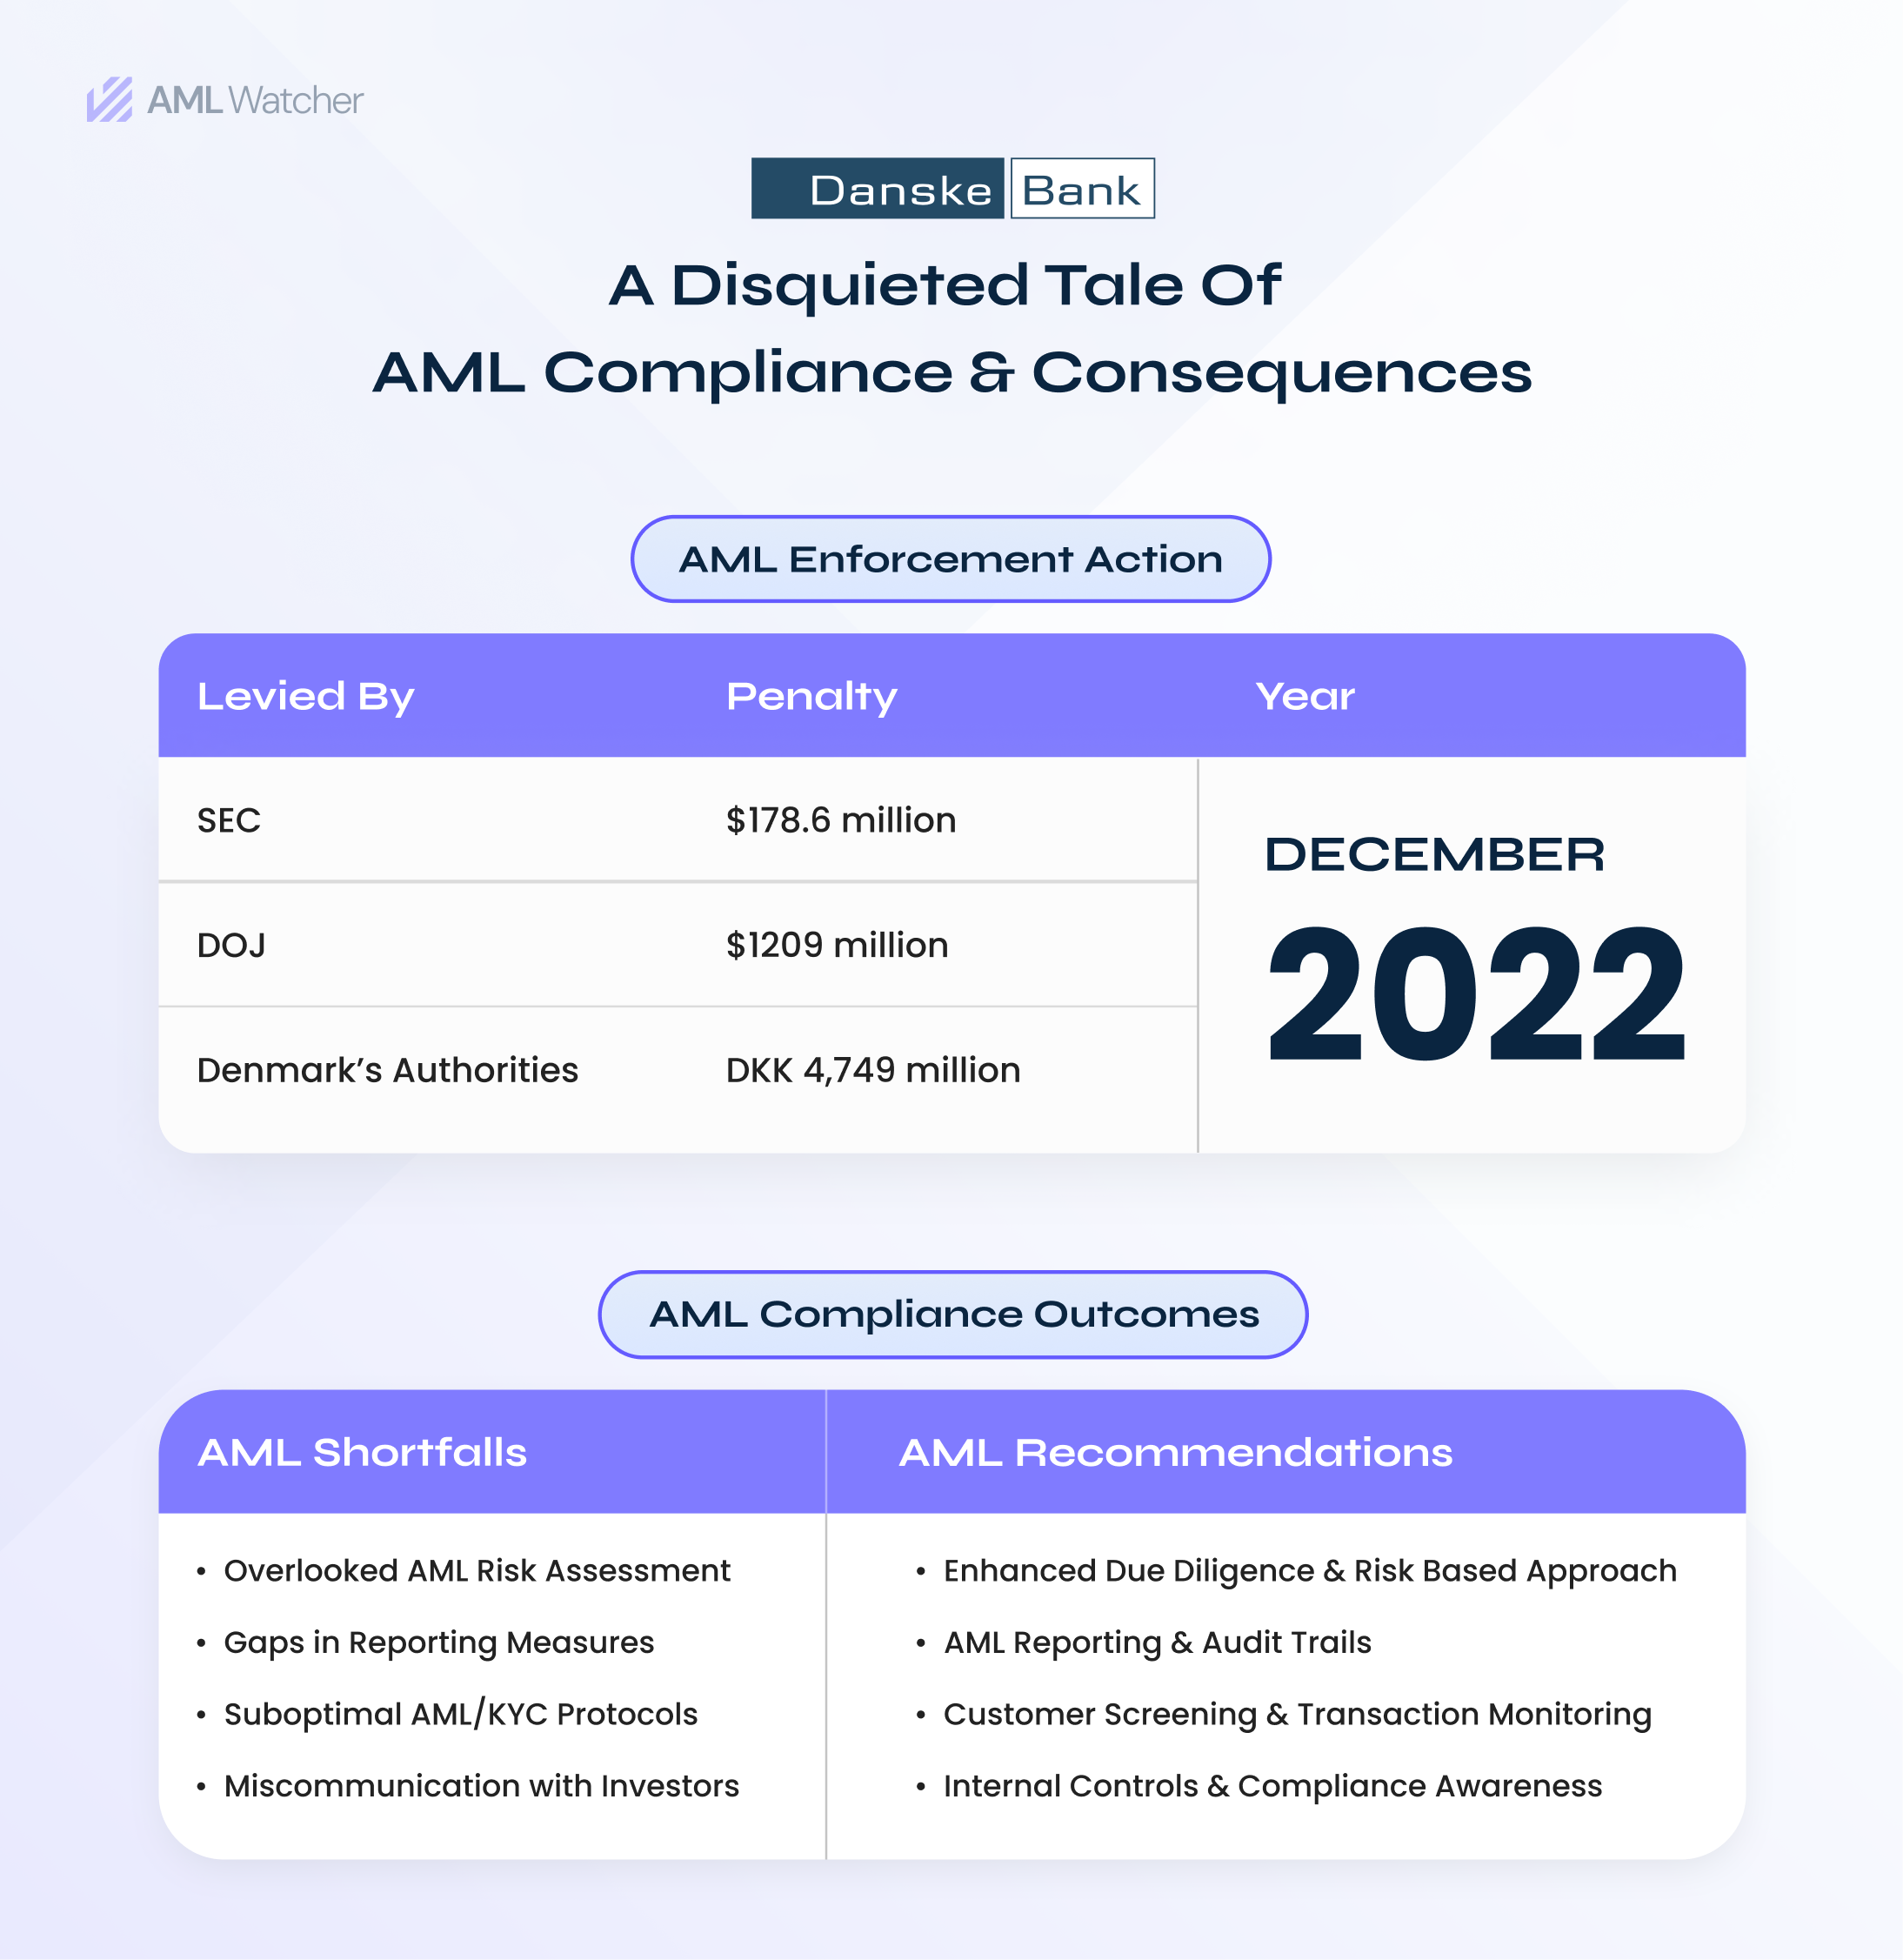 featured image shows the compliance scandal of Danske Bank with AML fines, penalty year, imposing body, AML compliance shortfalls/deficiencies, and recommended AML measures